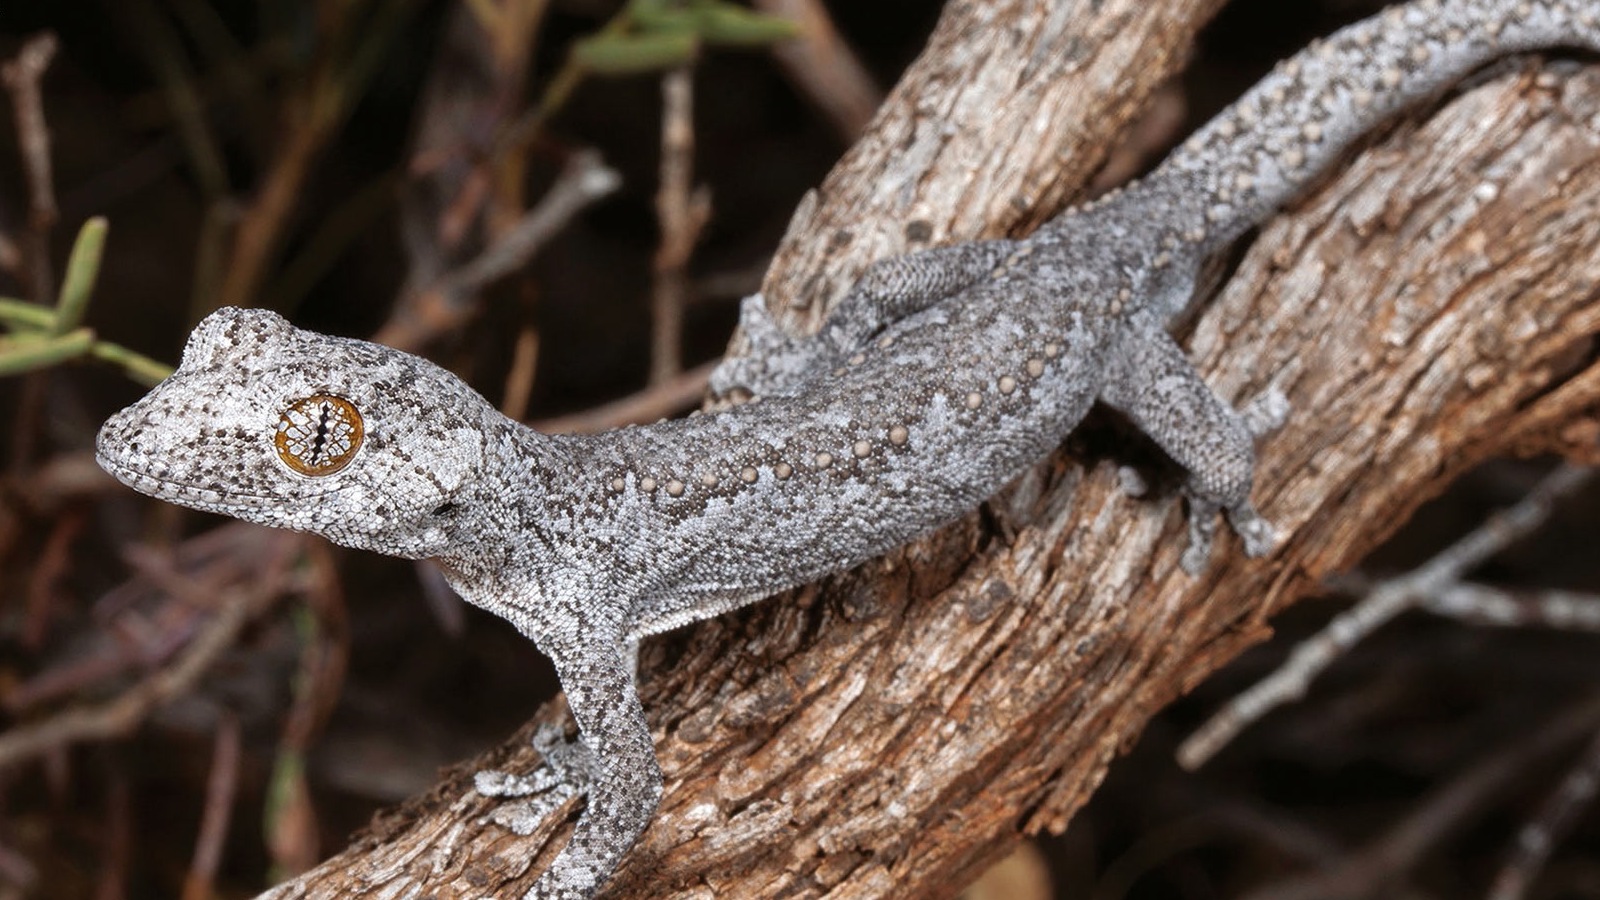 A whole body shot of the gecko sitting on a tree branch.